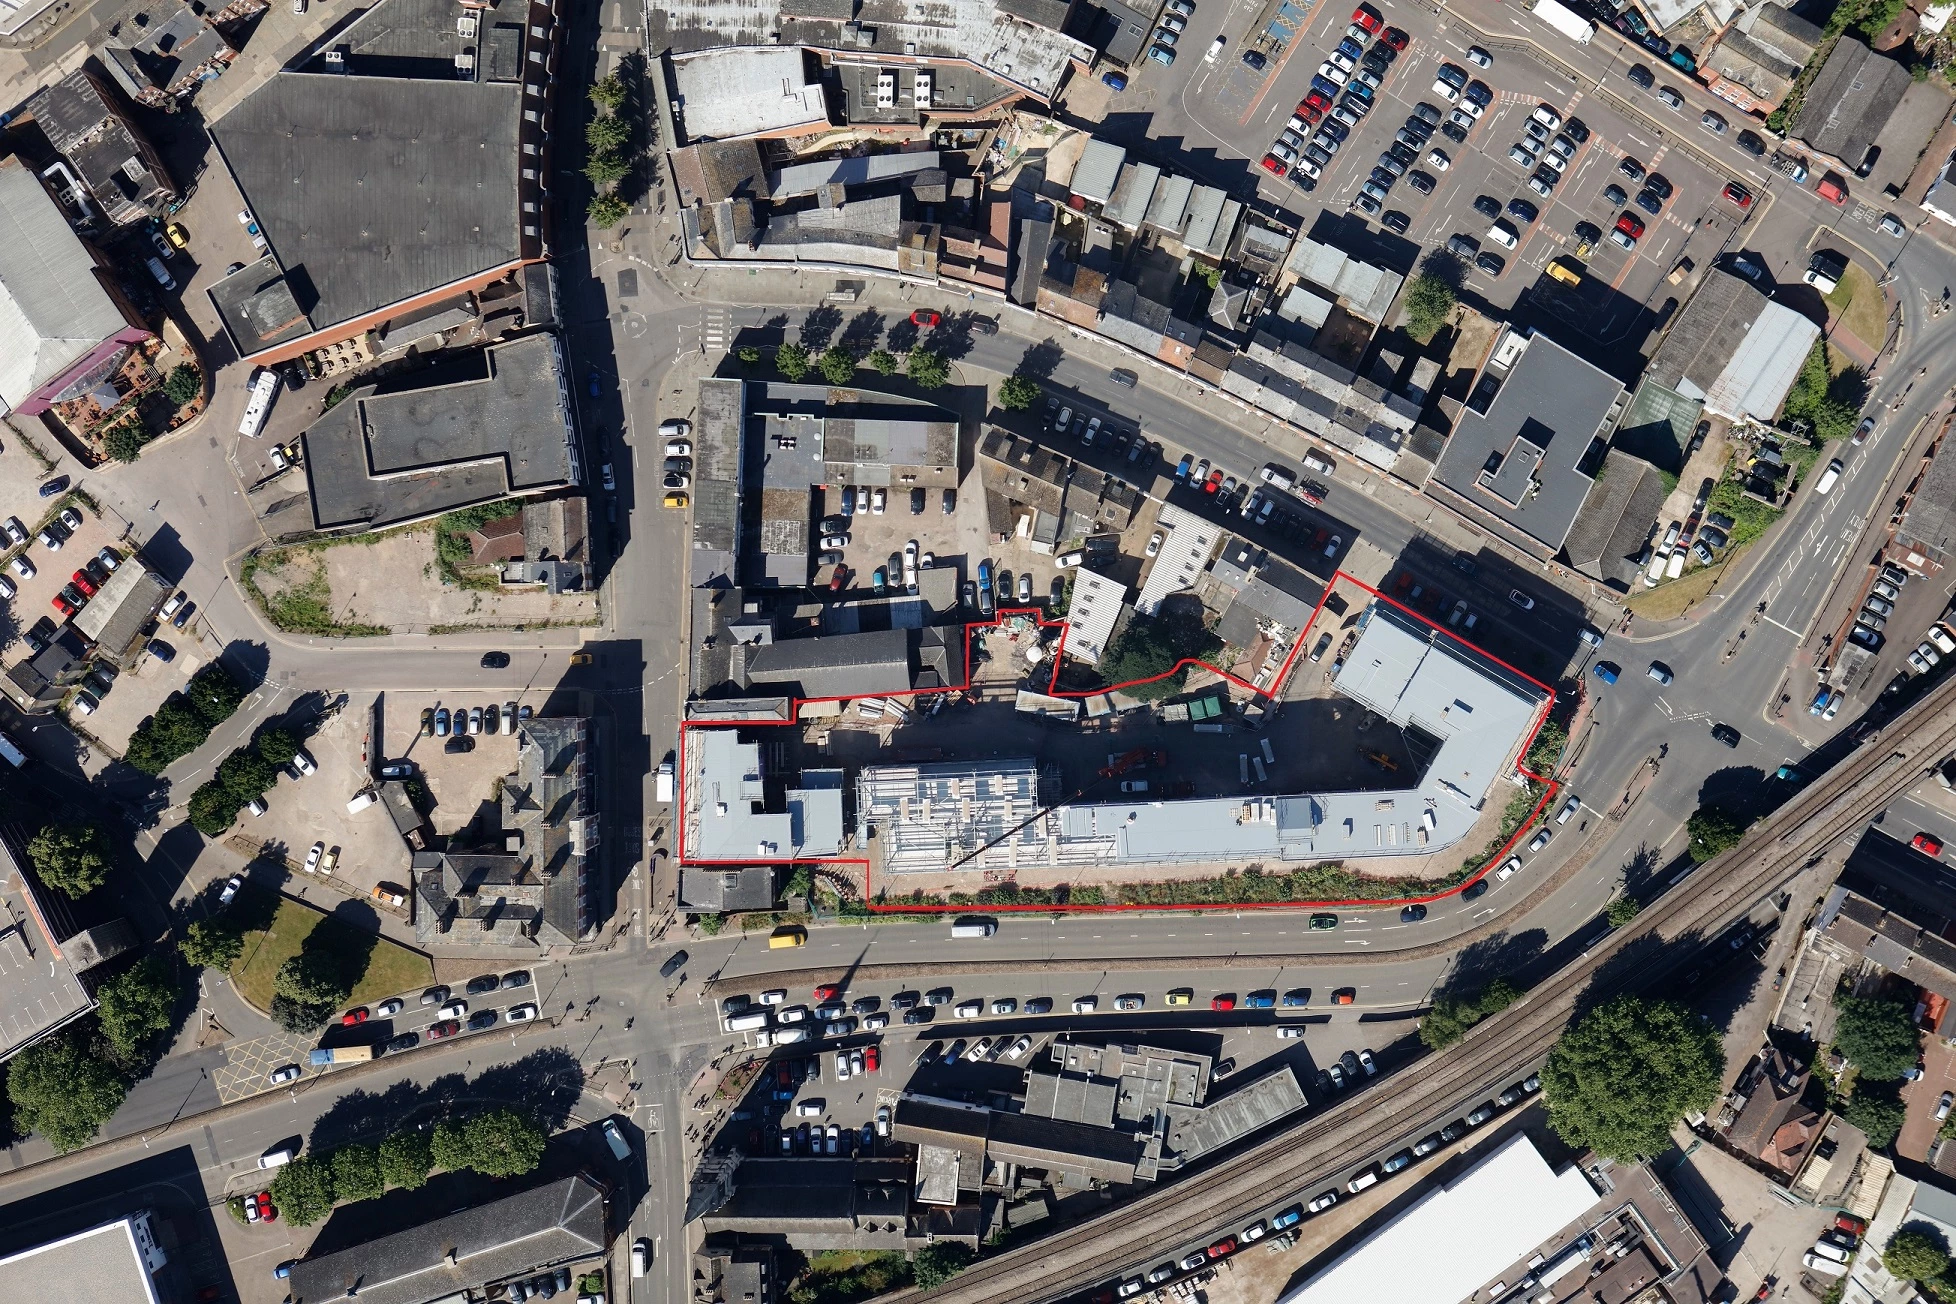 An overhead view of the site, showing the restricted working area.